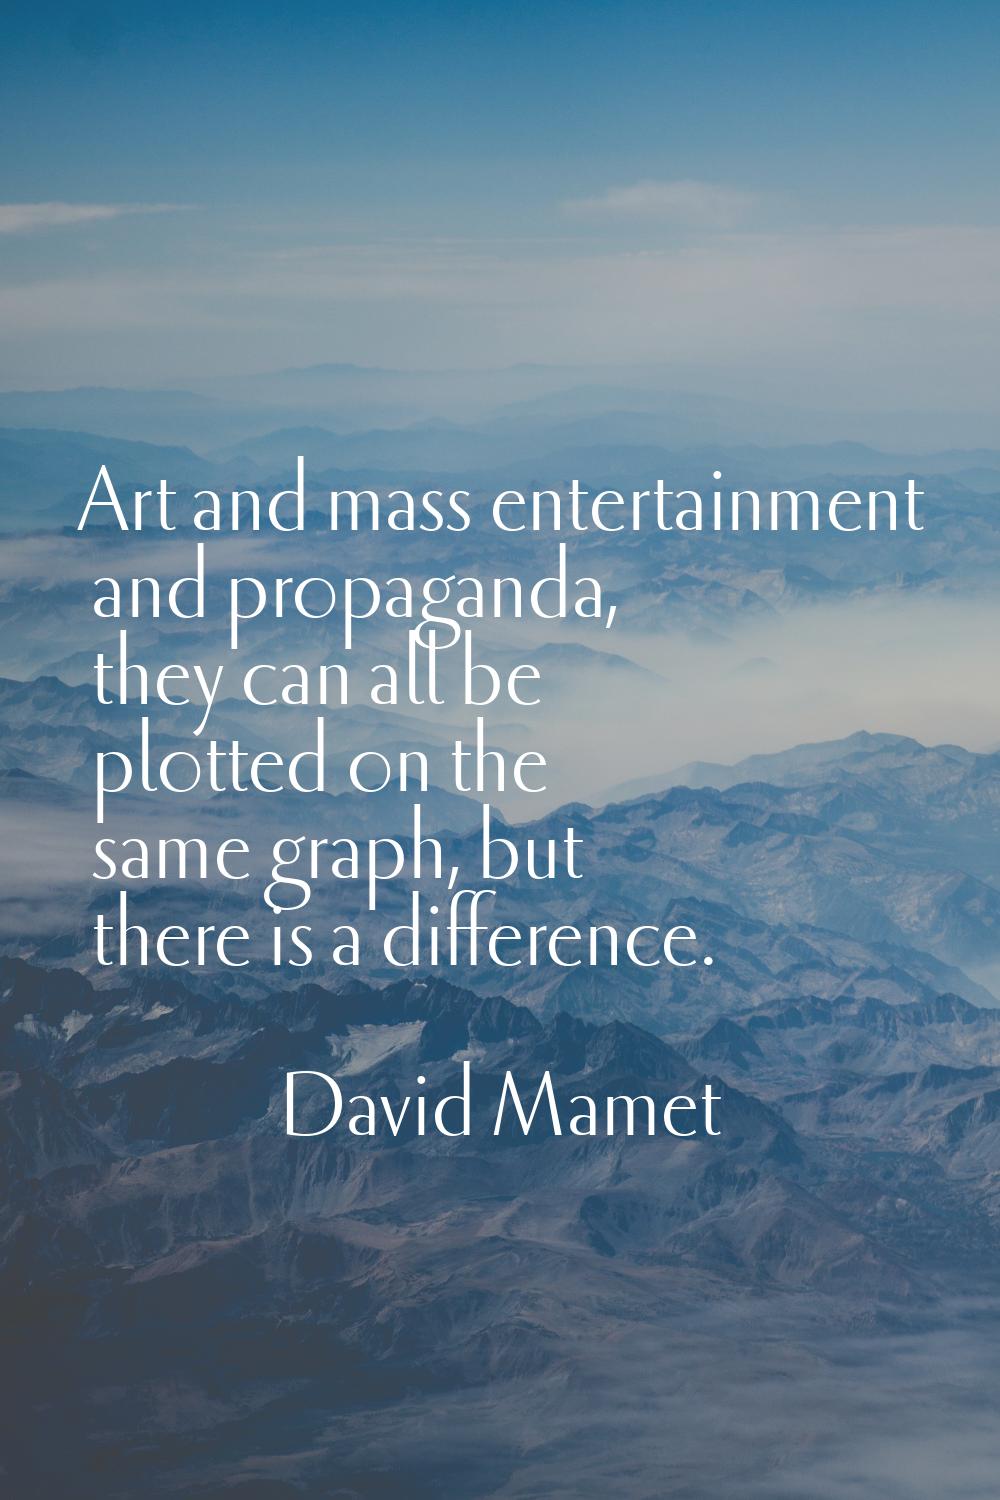 Art and mass entertainment and propaganda, they can all be plotted on the same graph, but there is 